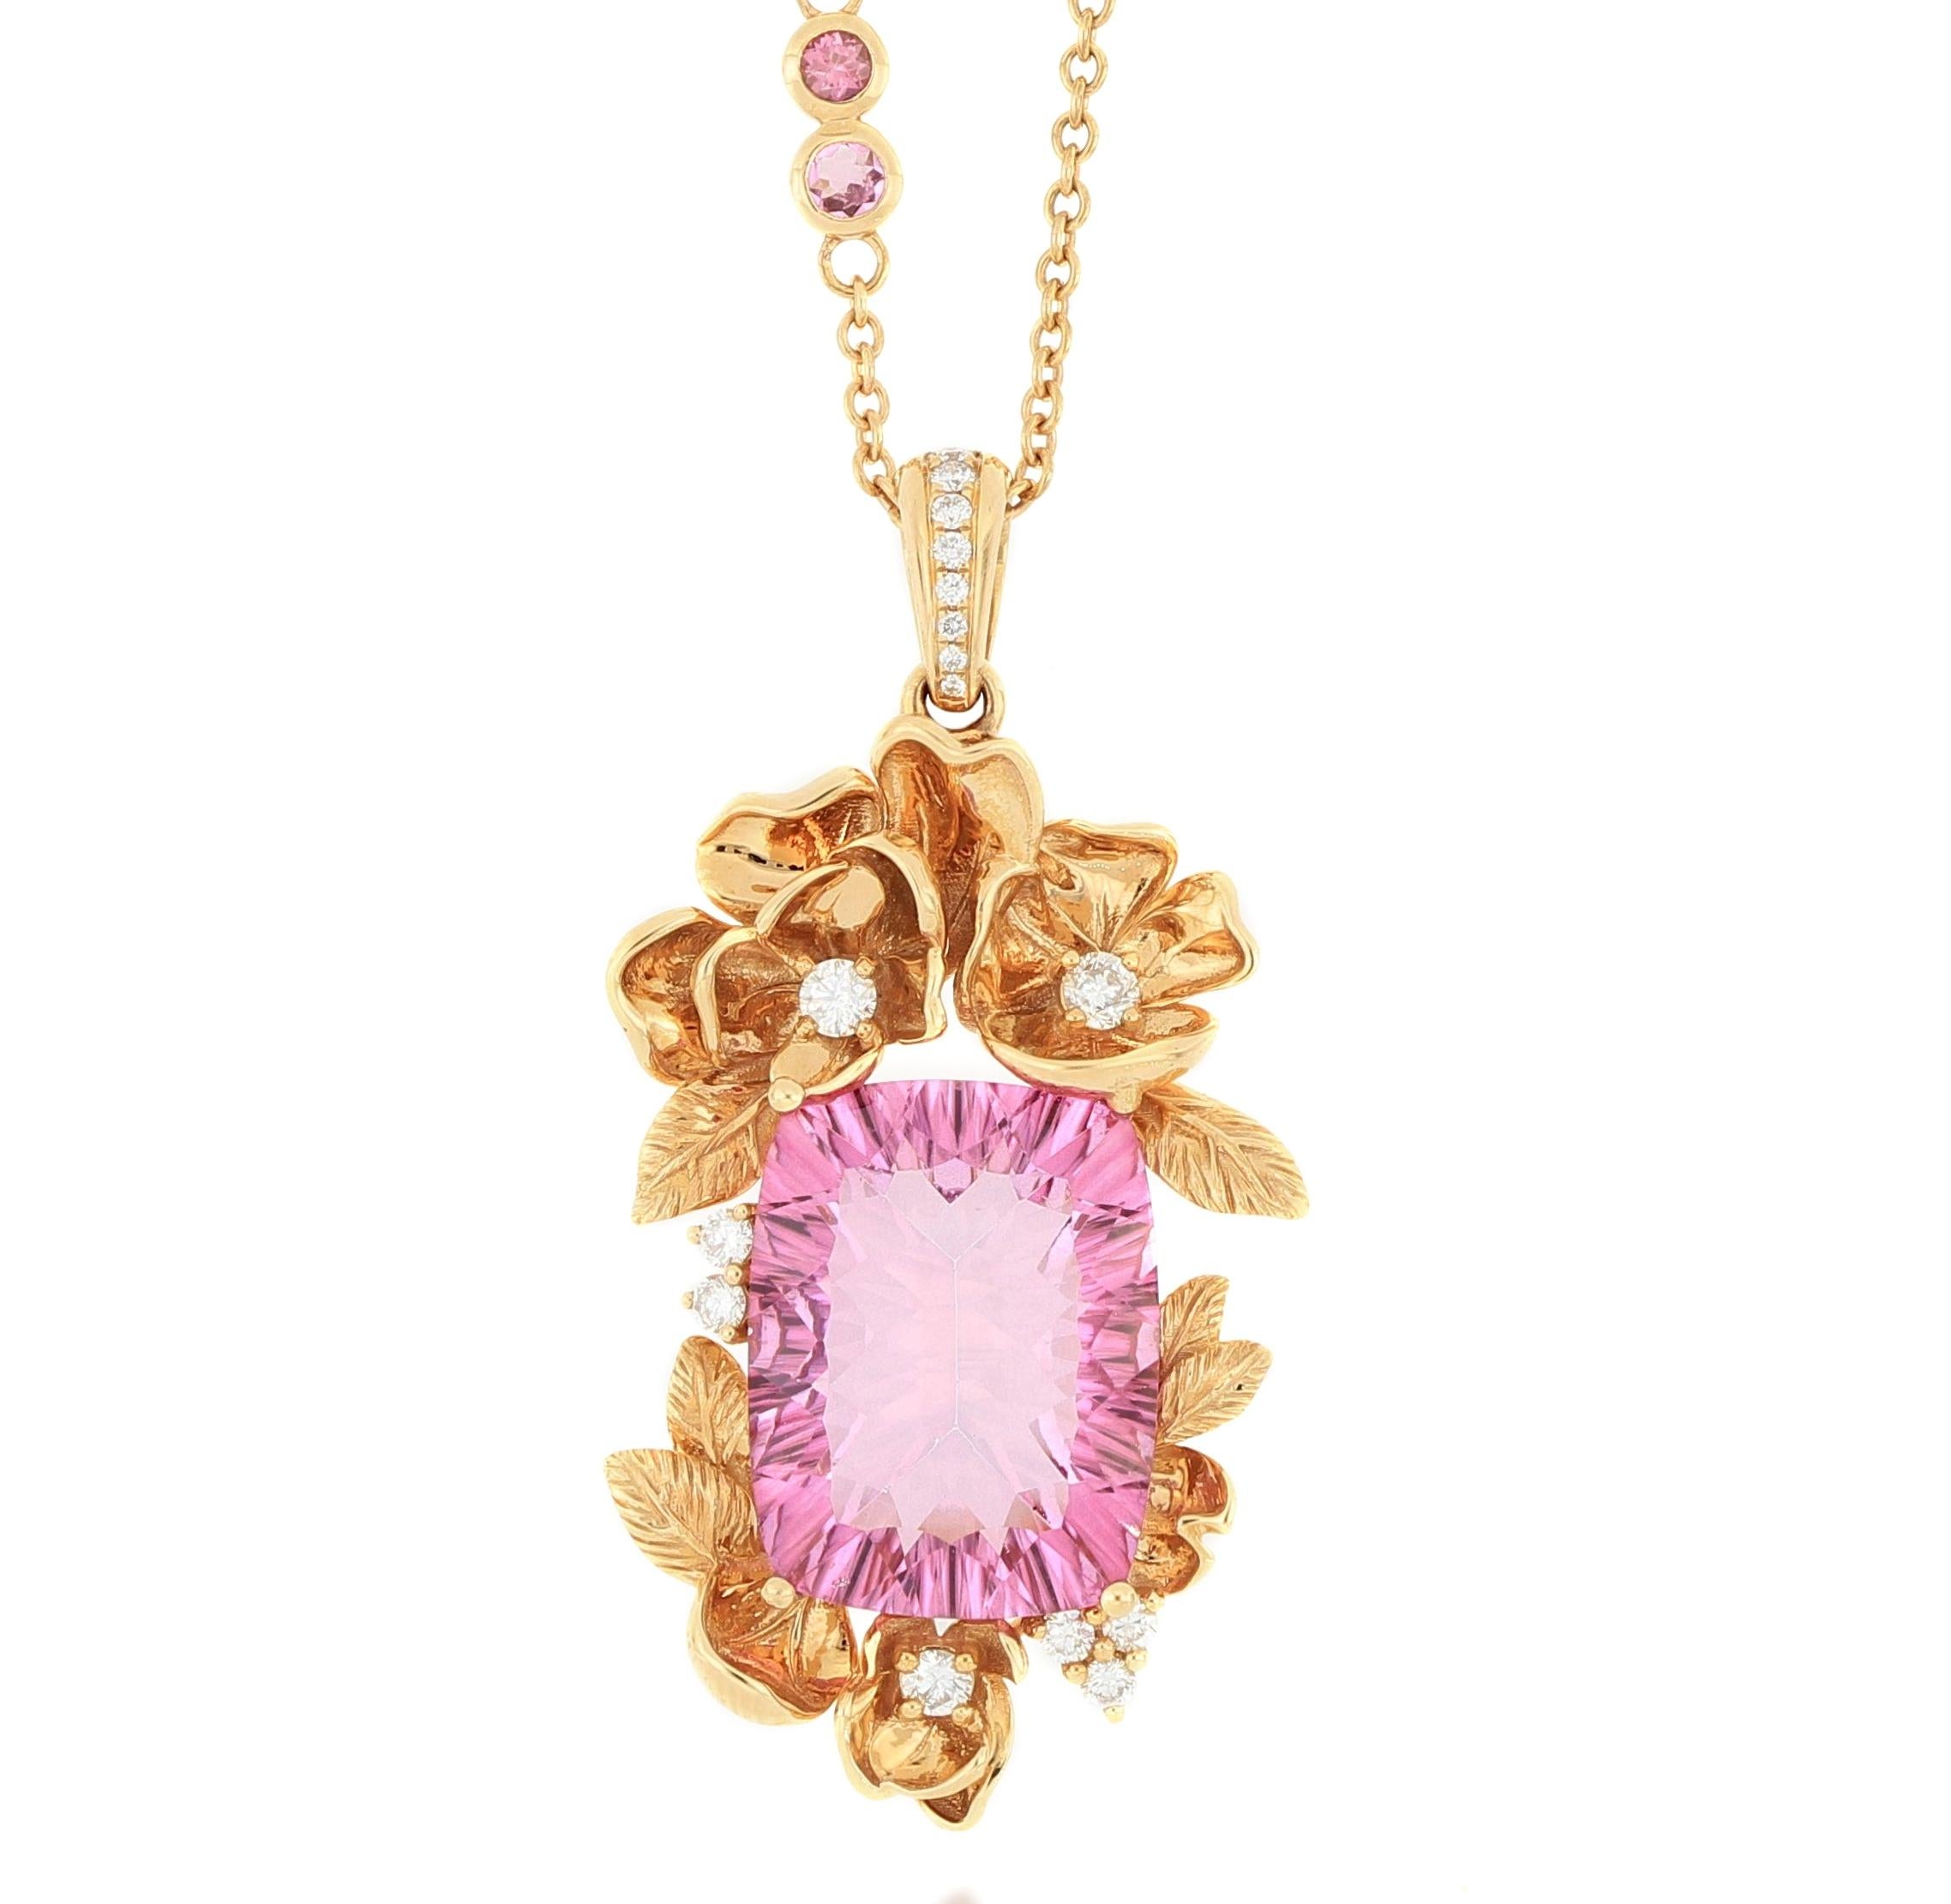 Finely detailed  flower leaves pendant set with an eye catching bright pink topaz weighing 12.7 carats, and brilliant diamonds, mounted in 18 karat rose gold. It comes with a necklace necklace decorated with brilliant diamond and pink